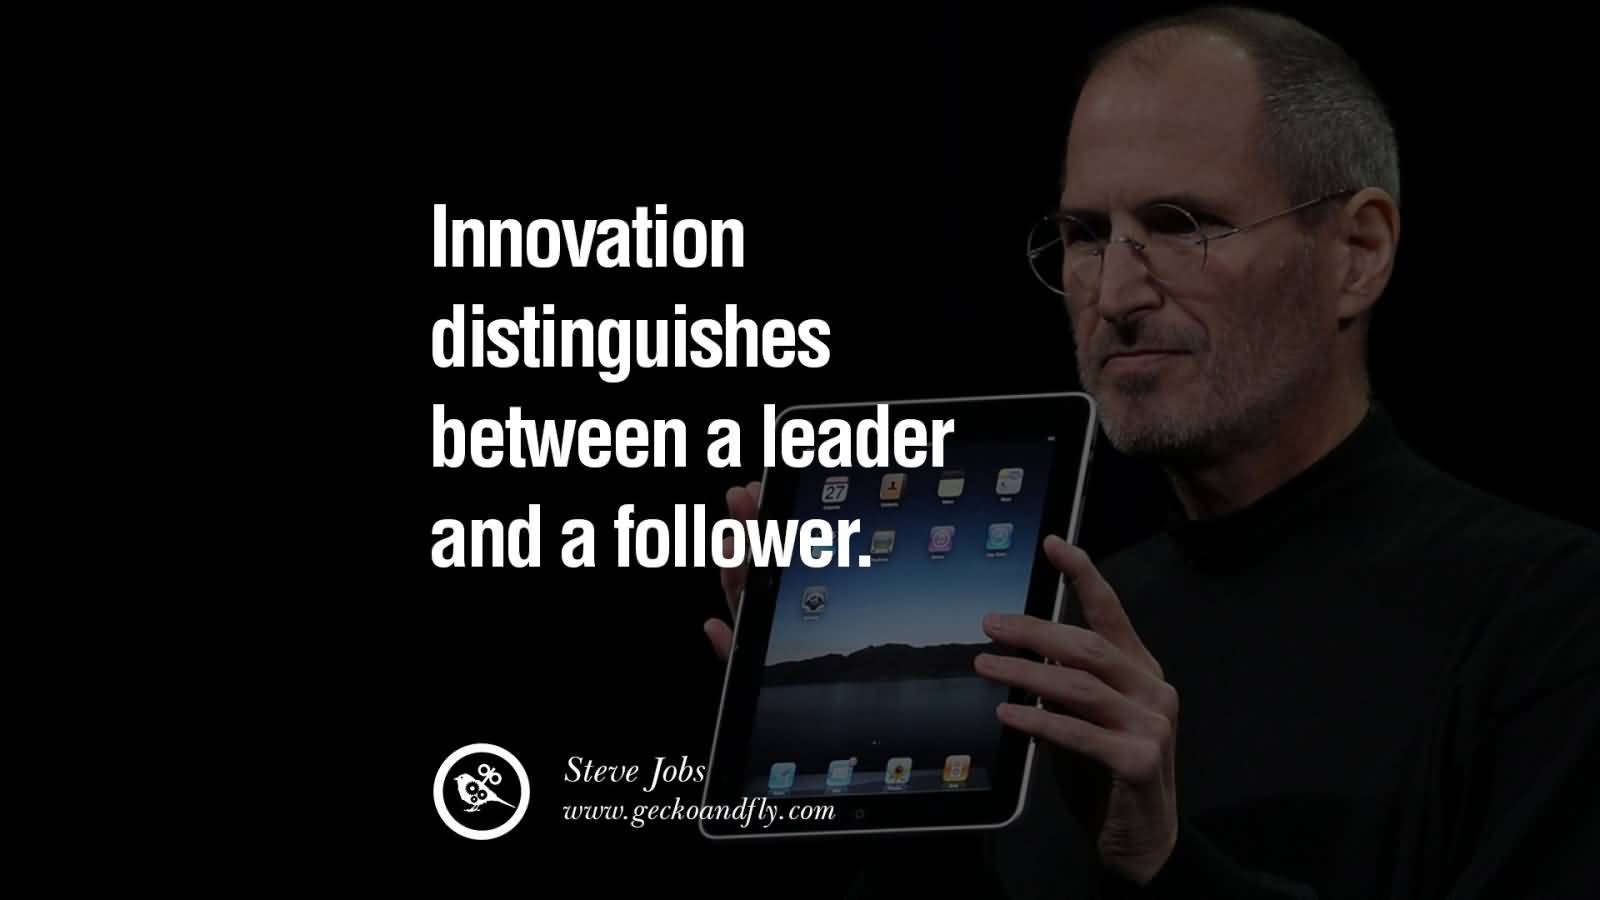 nnovation distinguishes between a leader and a follower. Steve Jobs